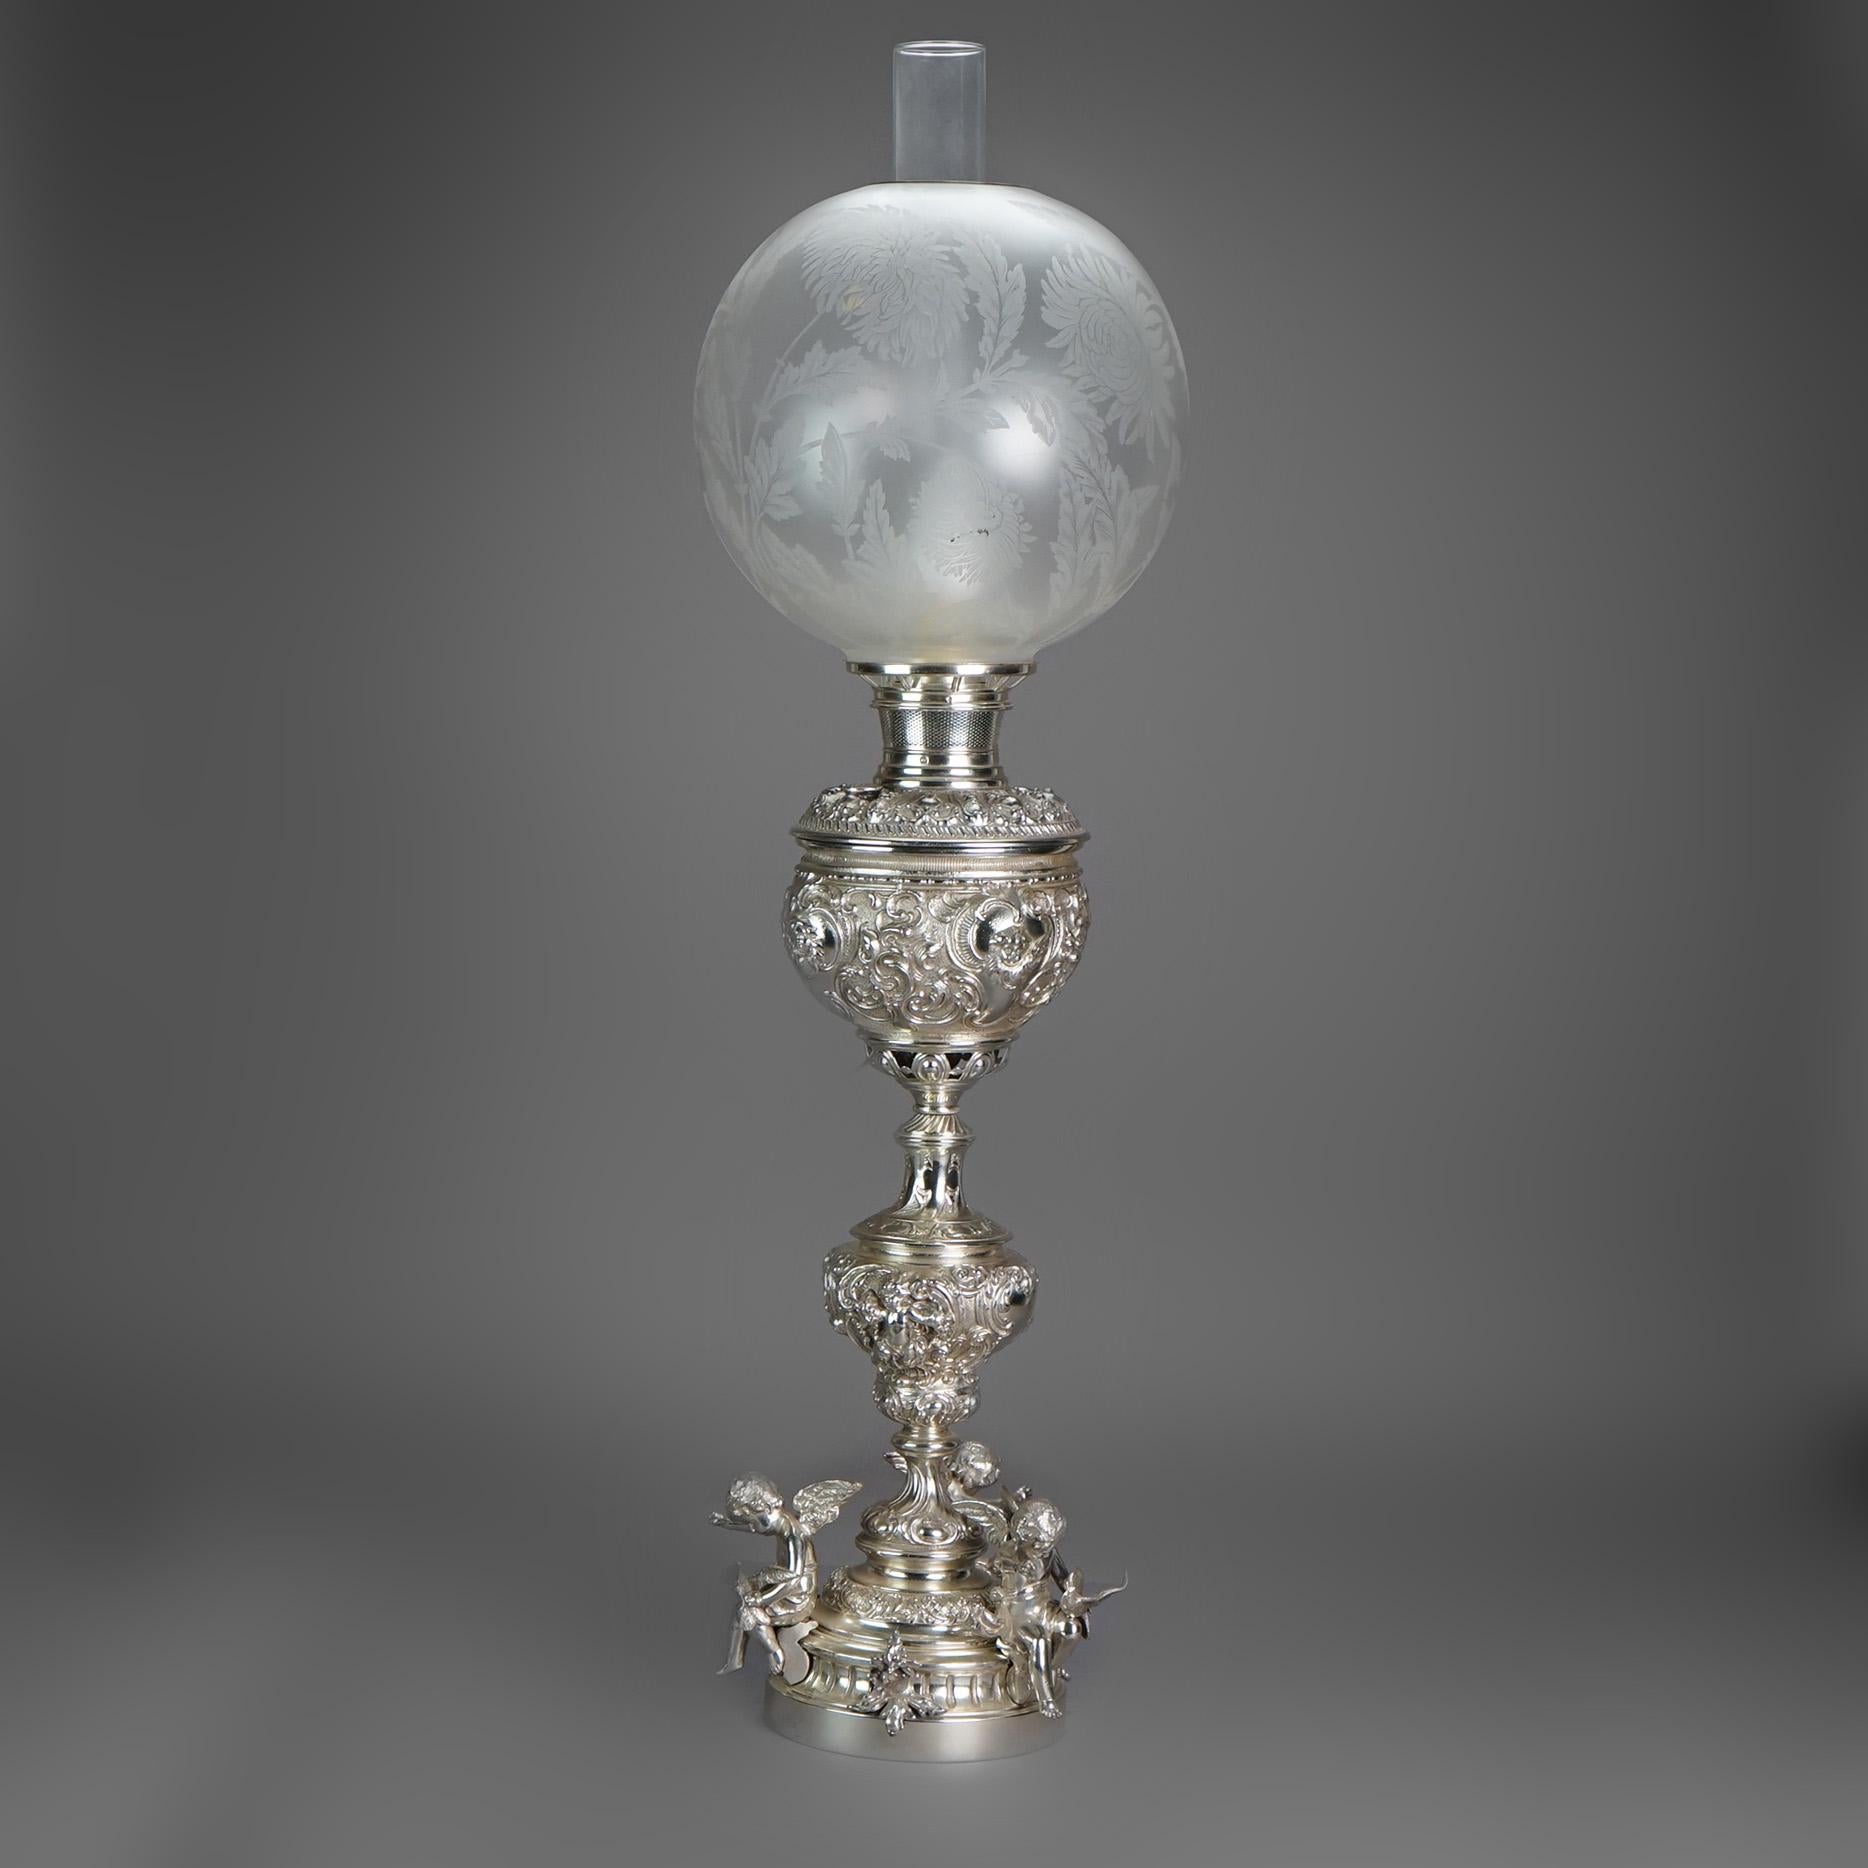 American Antique Rococo Figural Silver Plate Parlor Lamp With Winged Cherubs c1890 For Sale